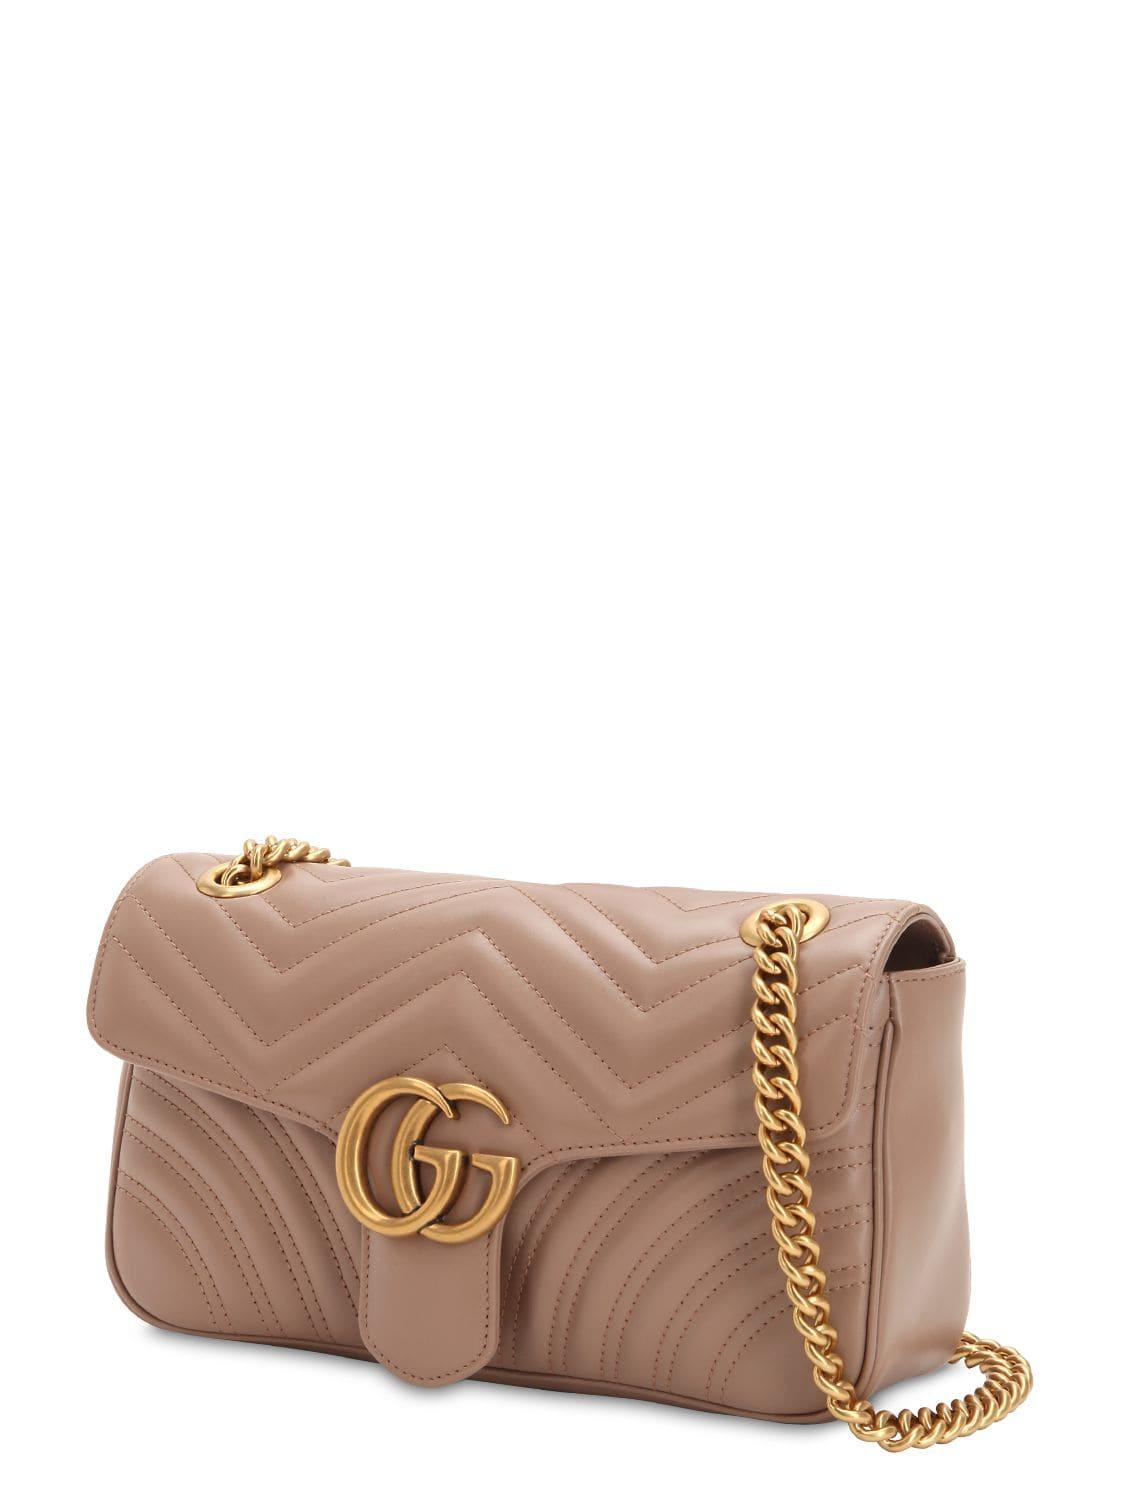 Gucci Small Gg Marmont 2.0 Leather Bag in Pink - Lyst